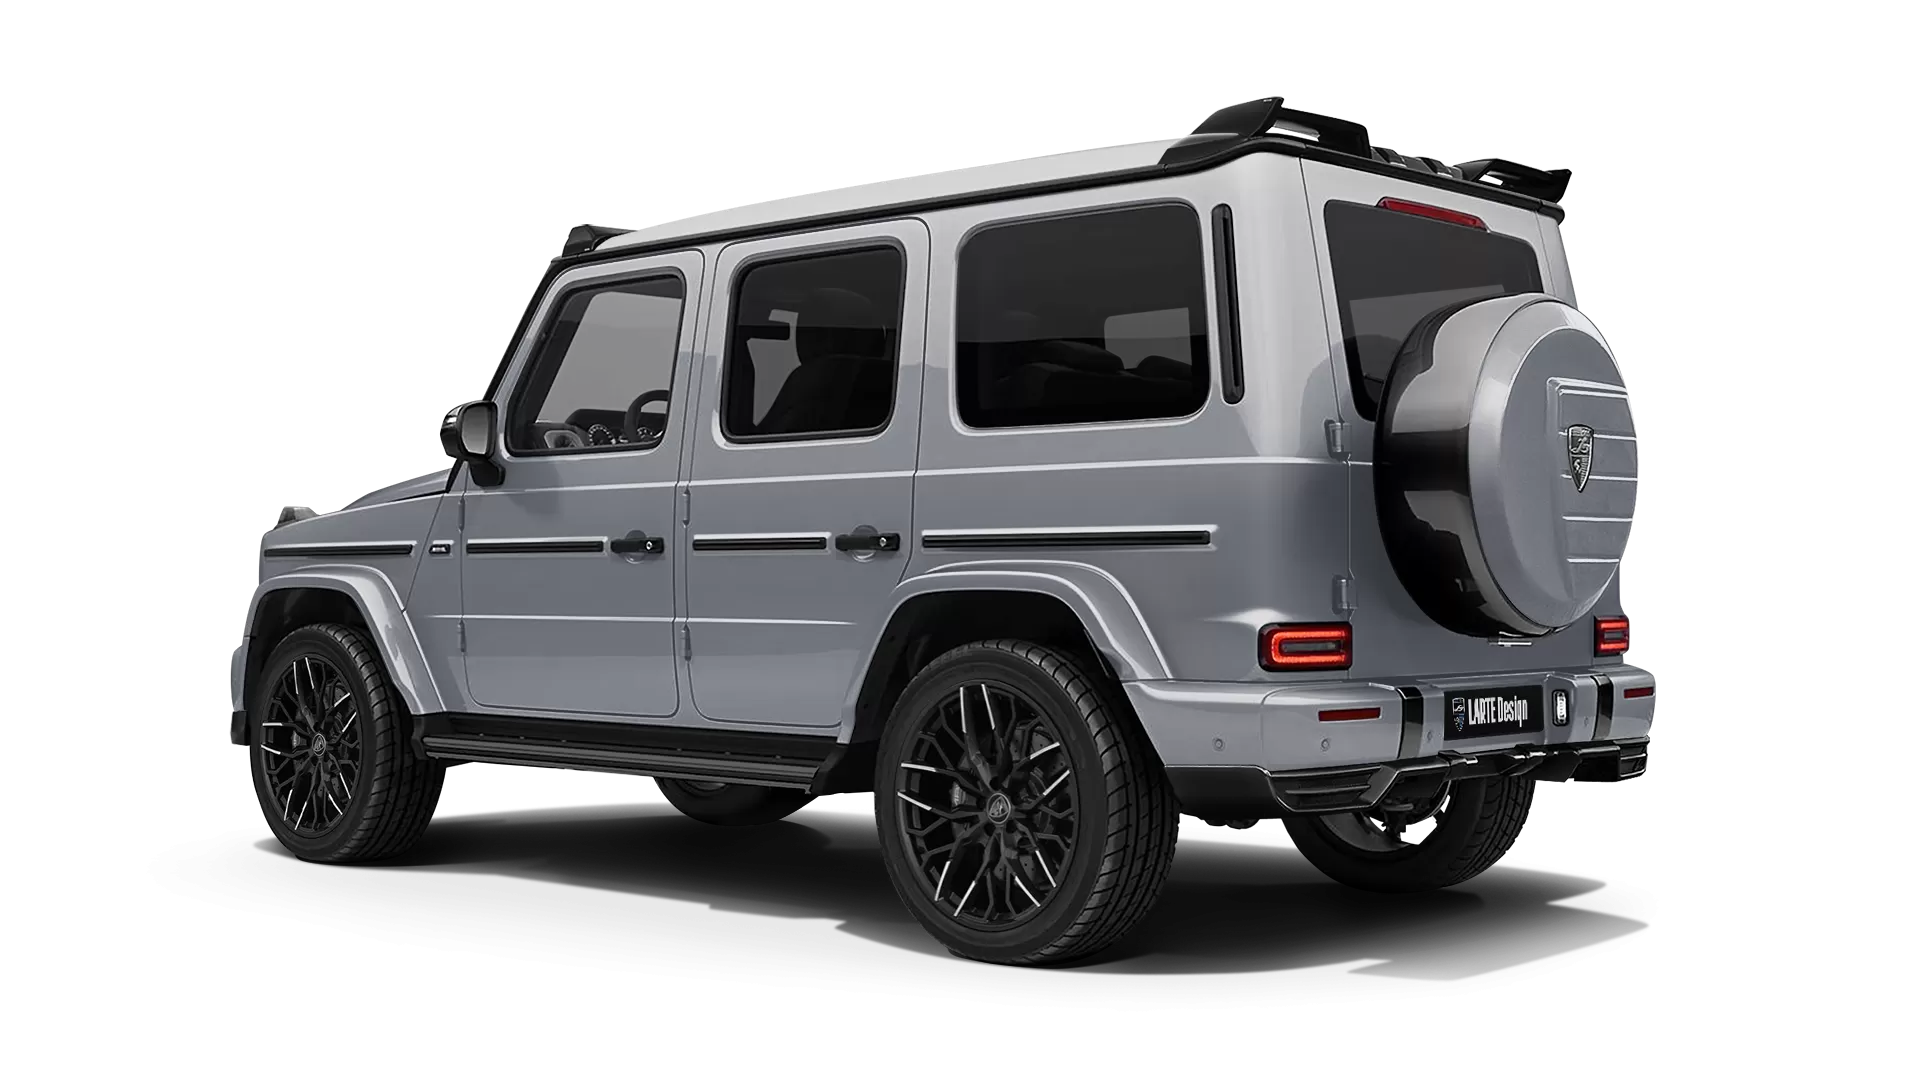 Mercedes G class W463 with painted body kit: rear view shown in Iridium Silver